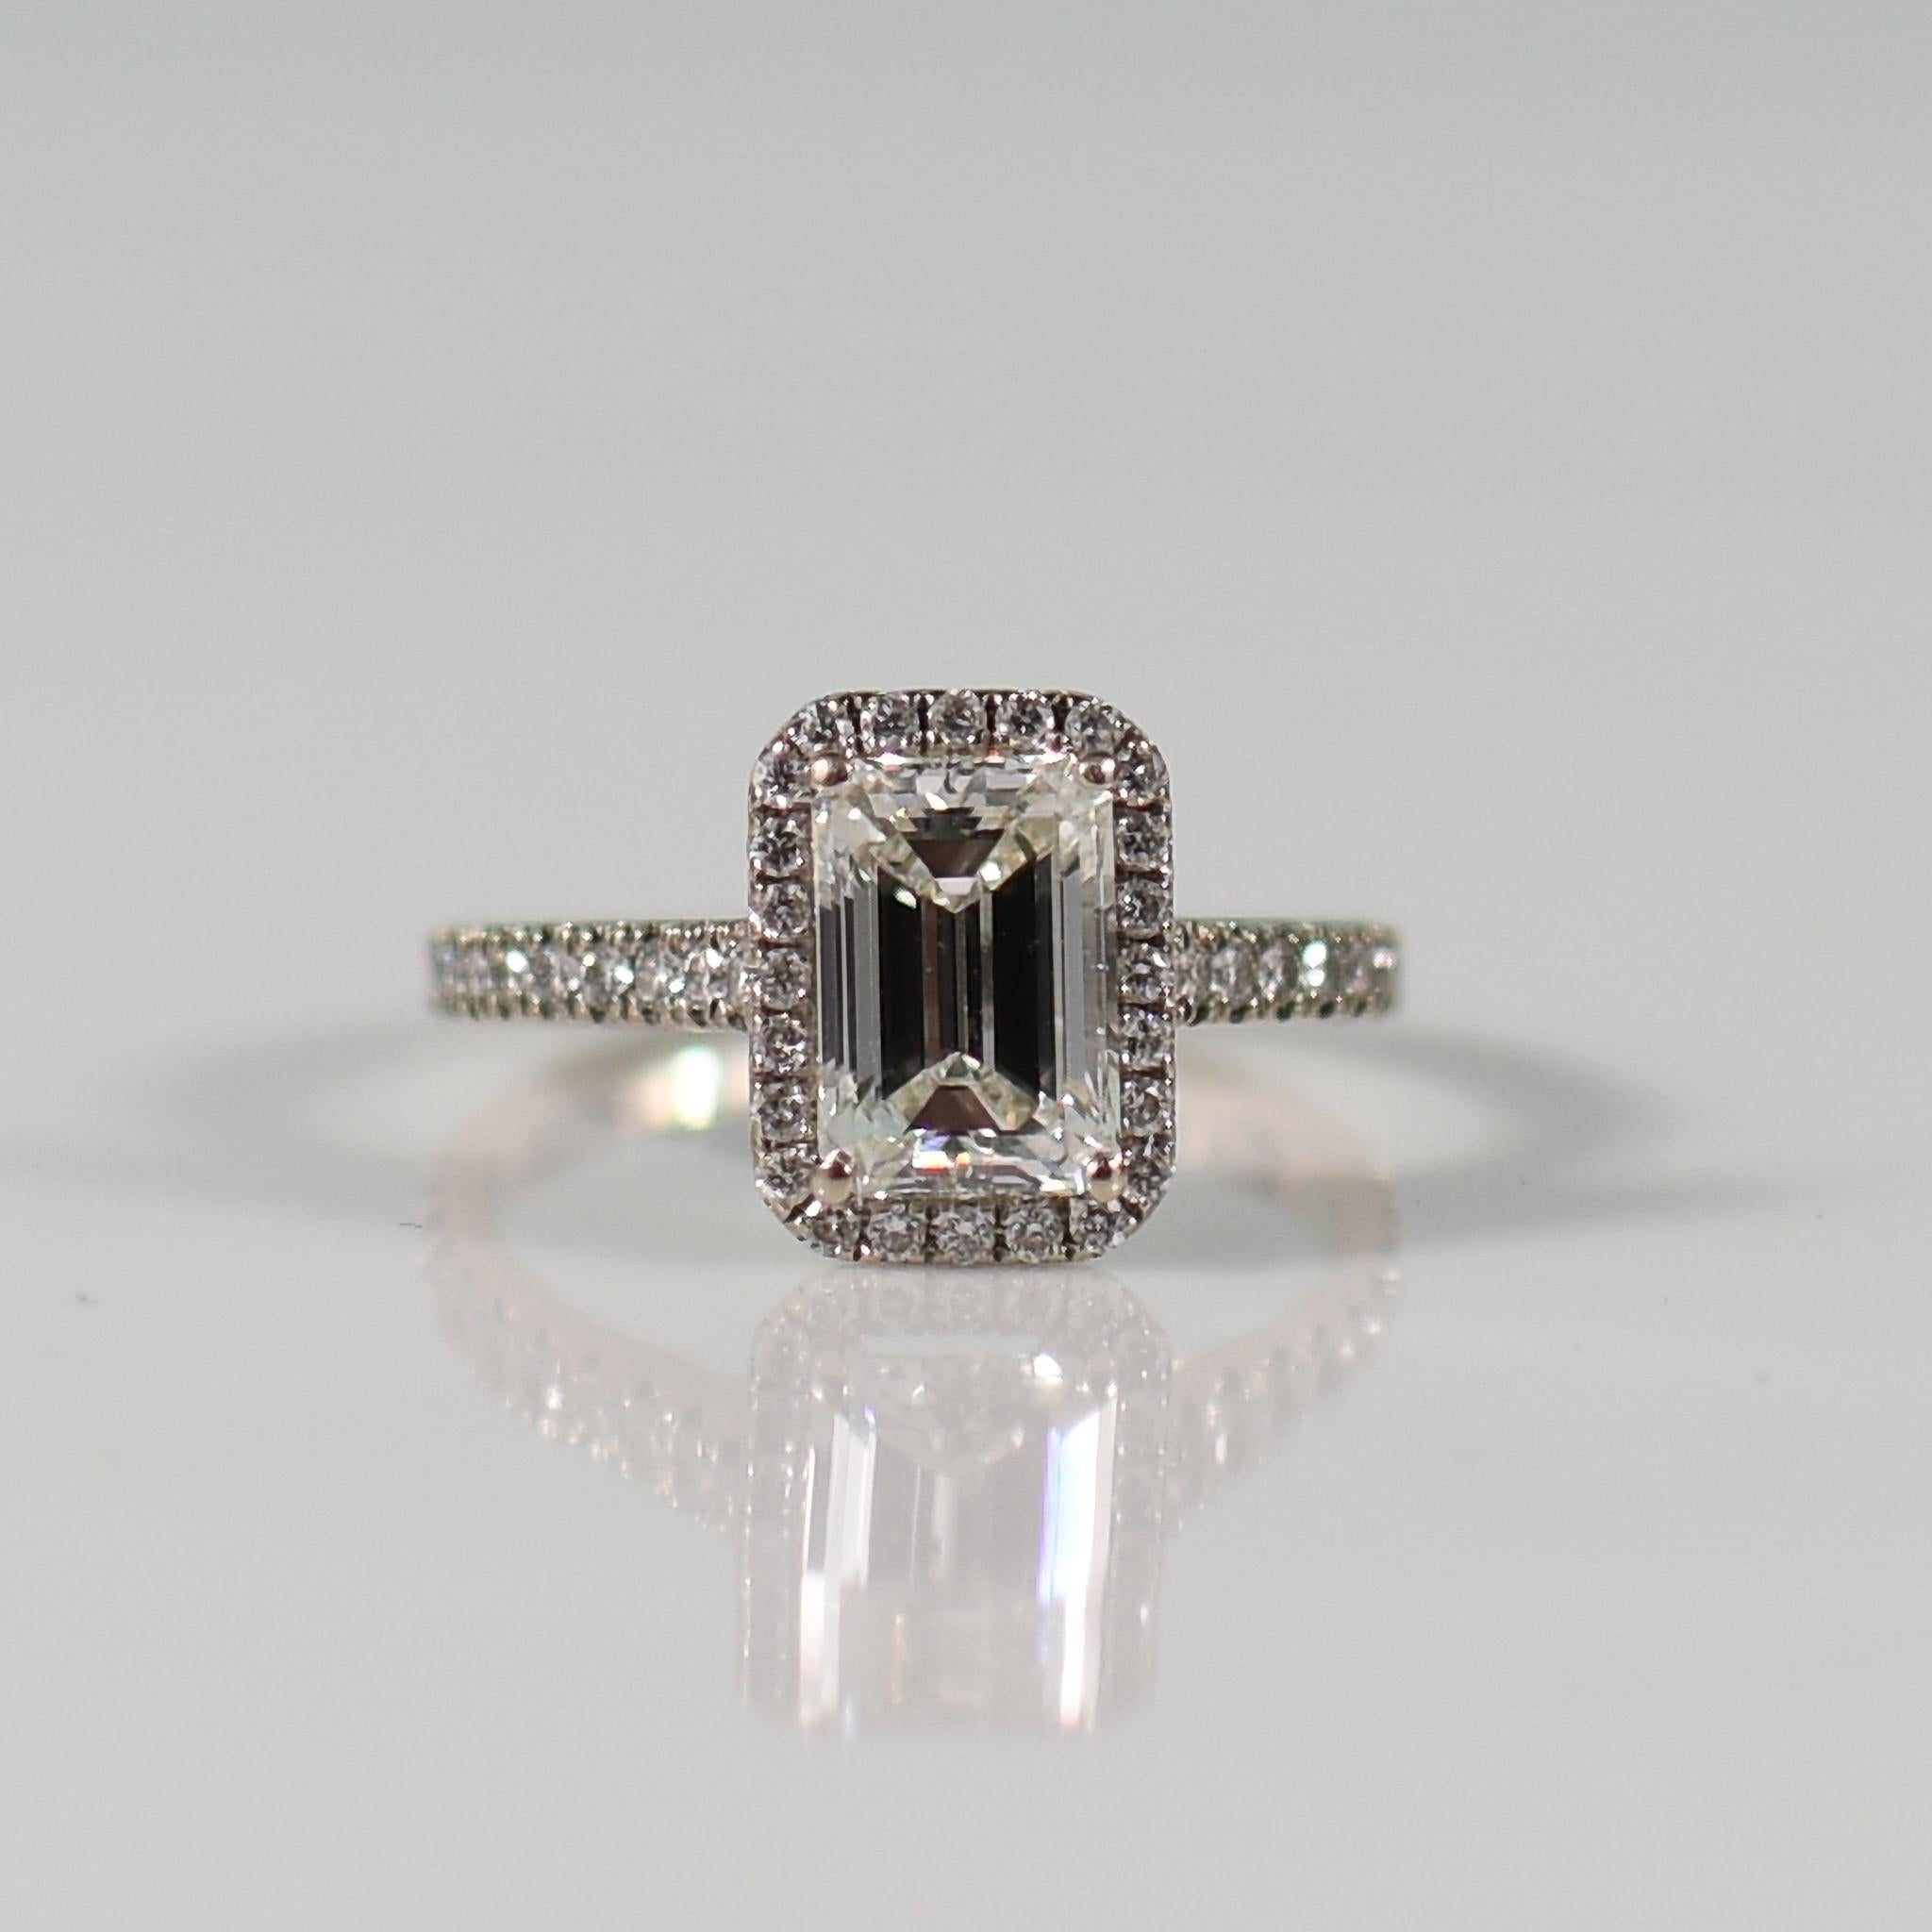 1.71ct Emerald Cut GIA Diamond Engagement Ring w Halo in 14K White Gold In Good Condition For Sale In Addison, TX